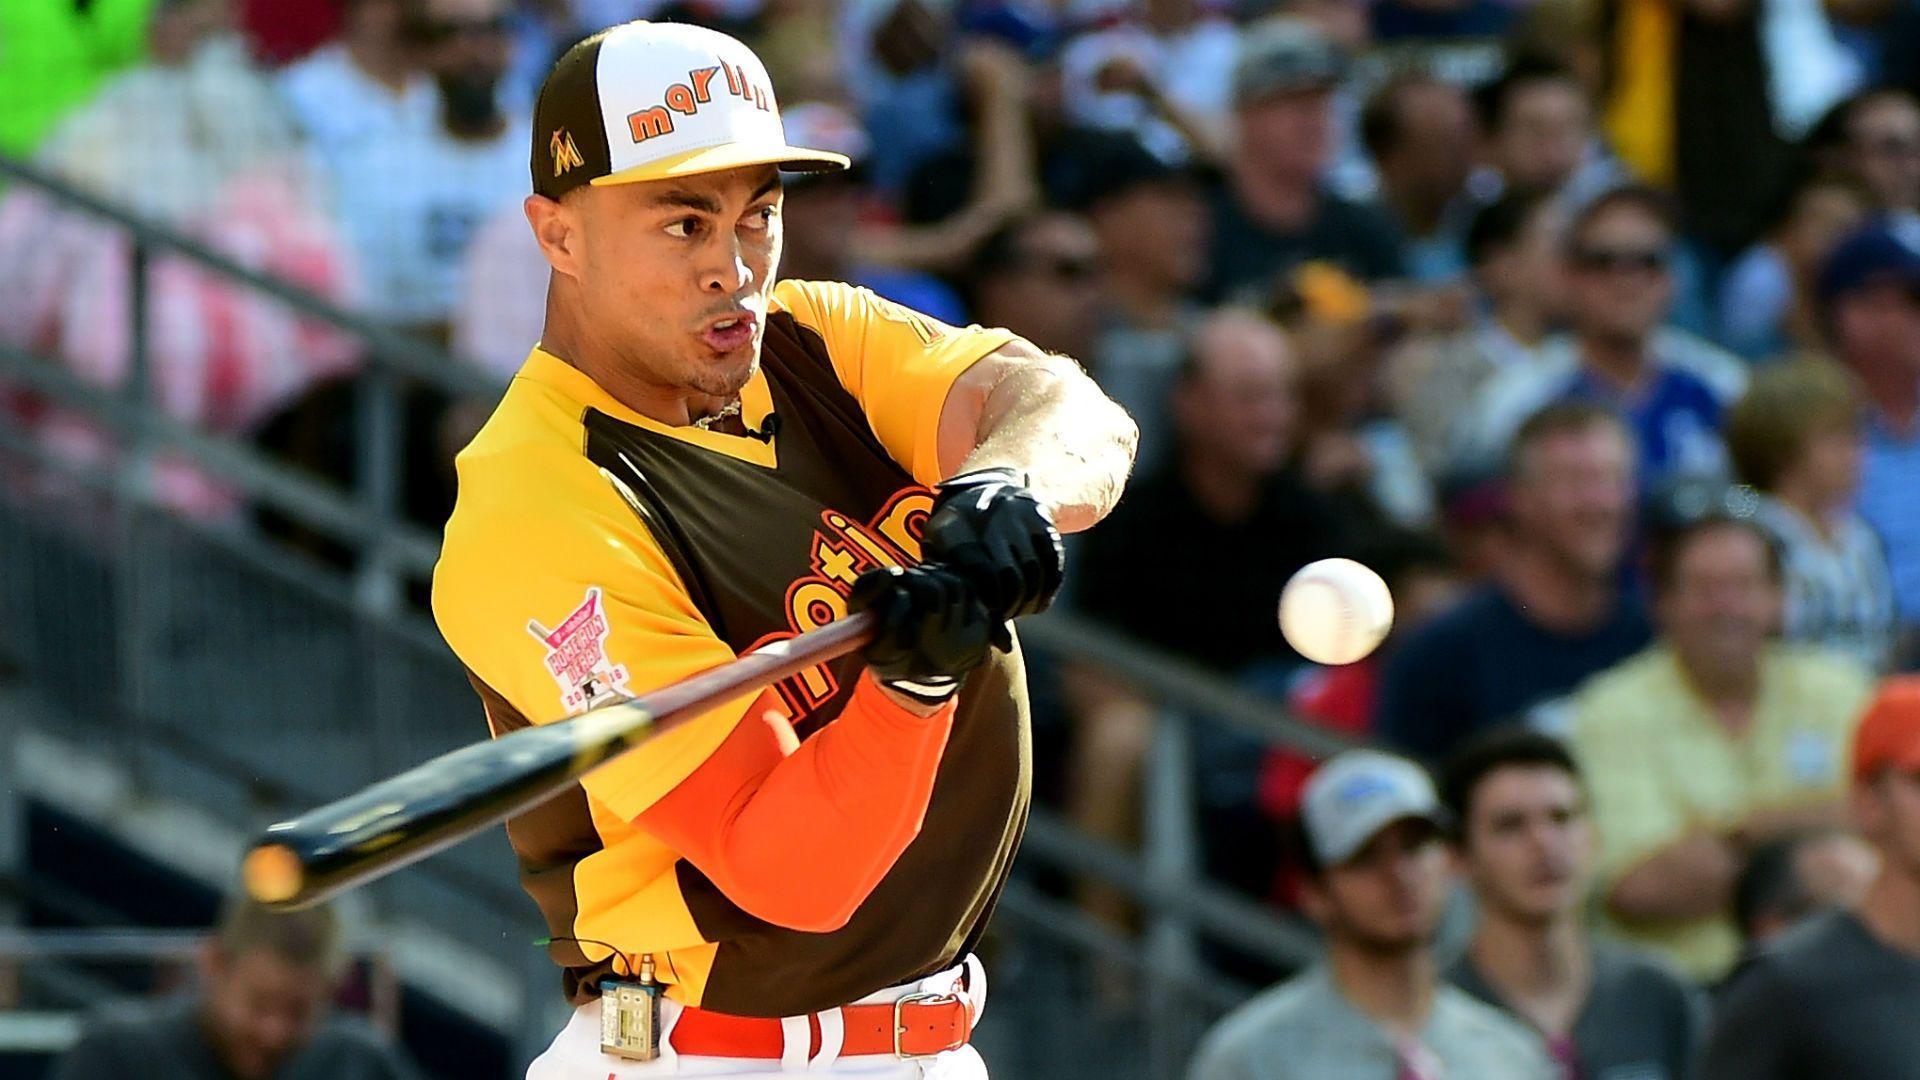 Giancarlo Stanton, not Aaron Judge, is top seed for Home Run Derby